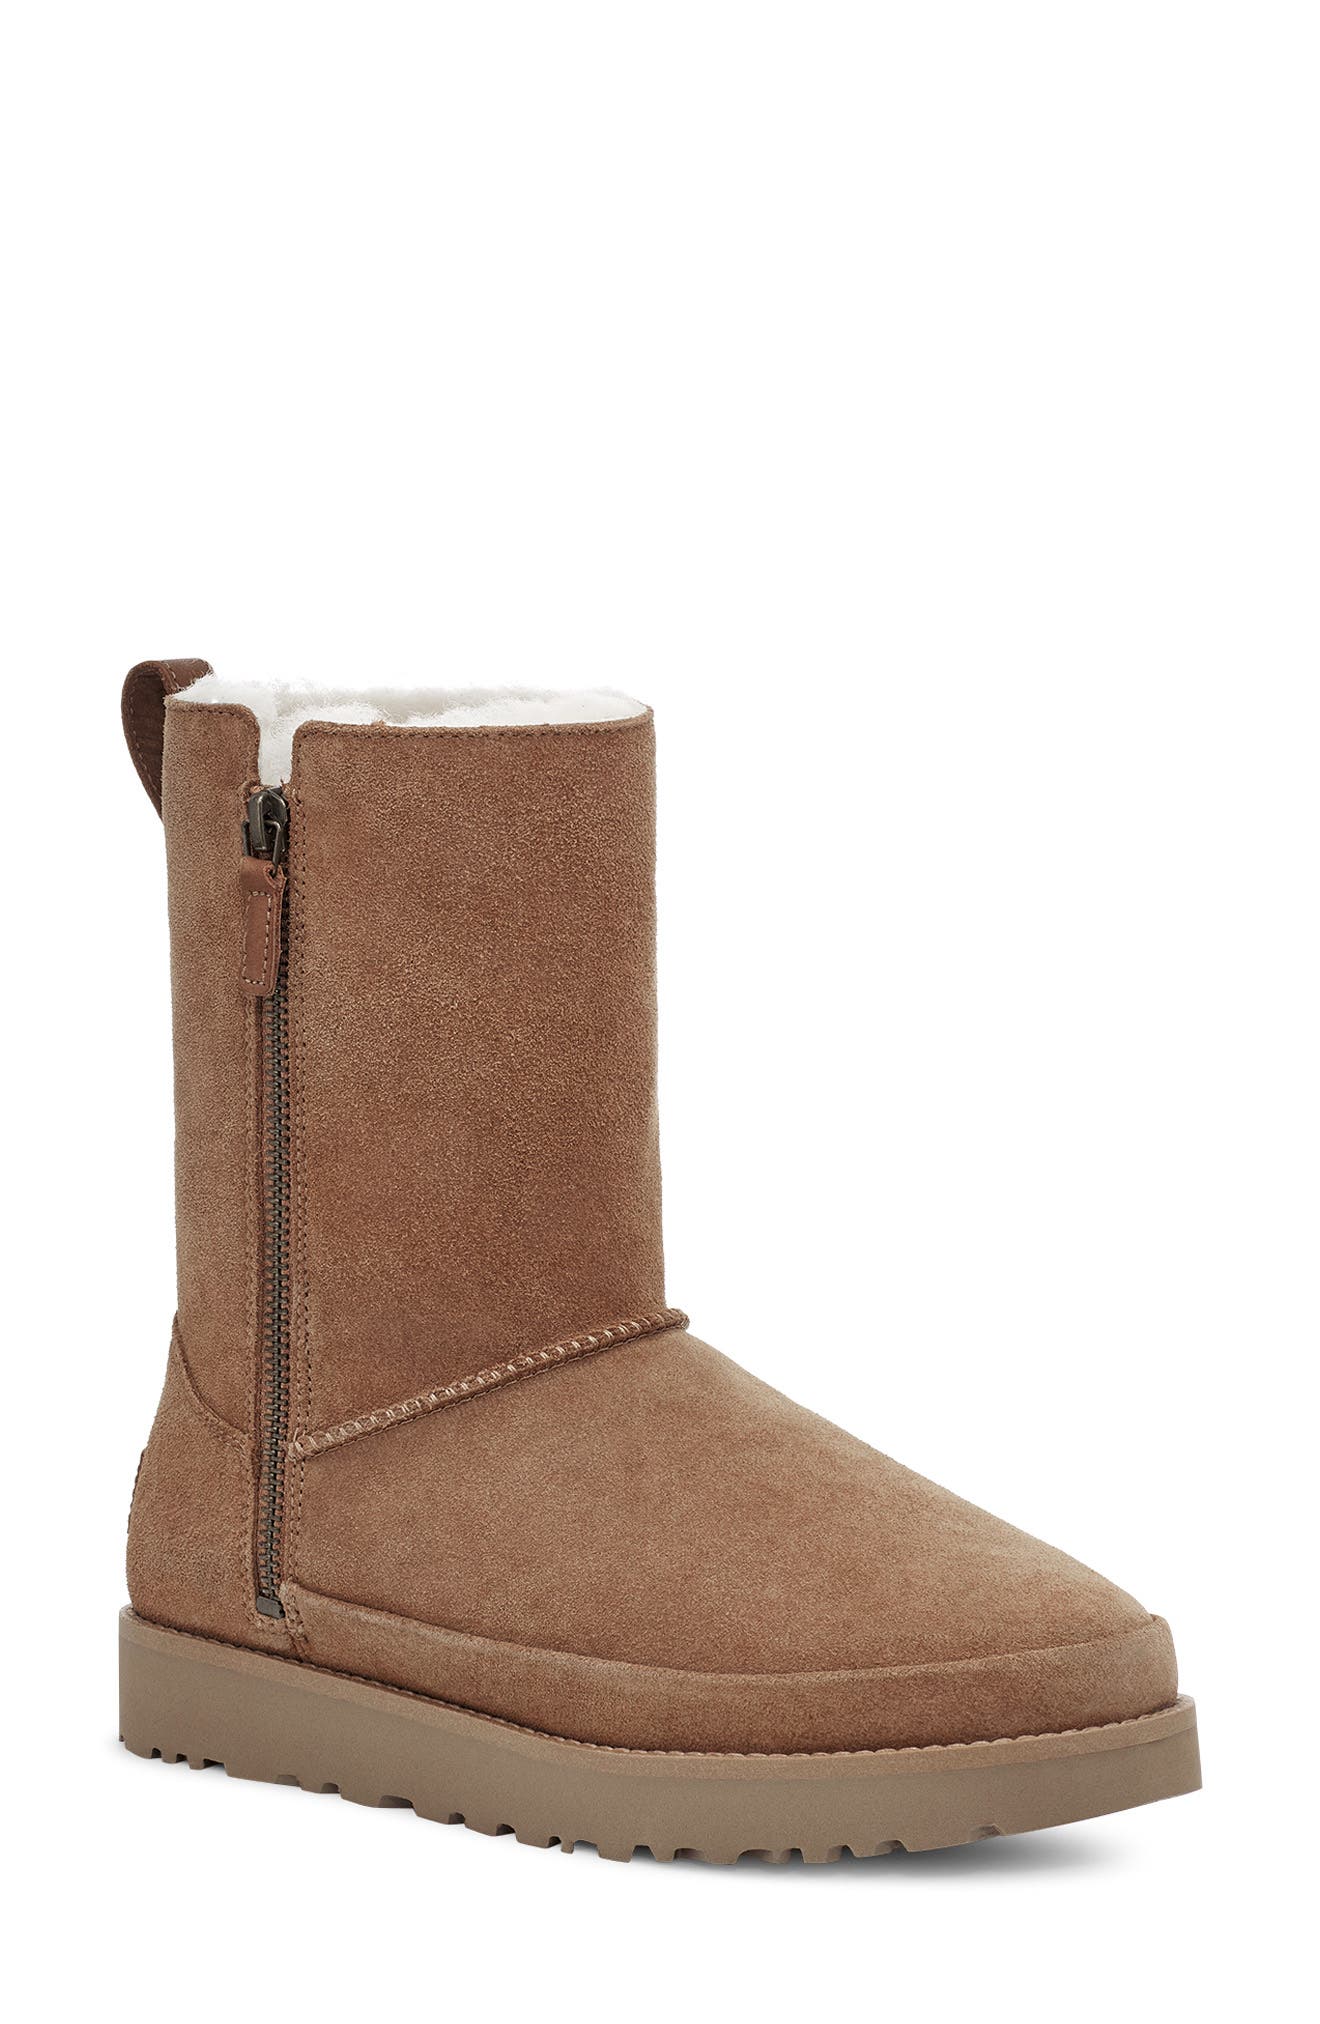 new female ugg boots